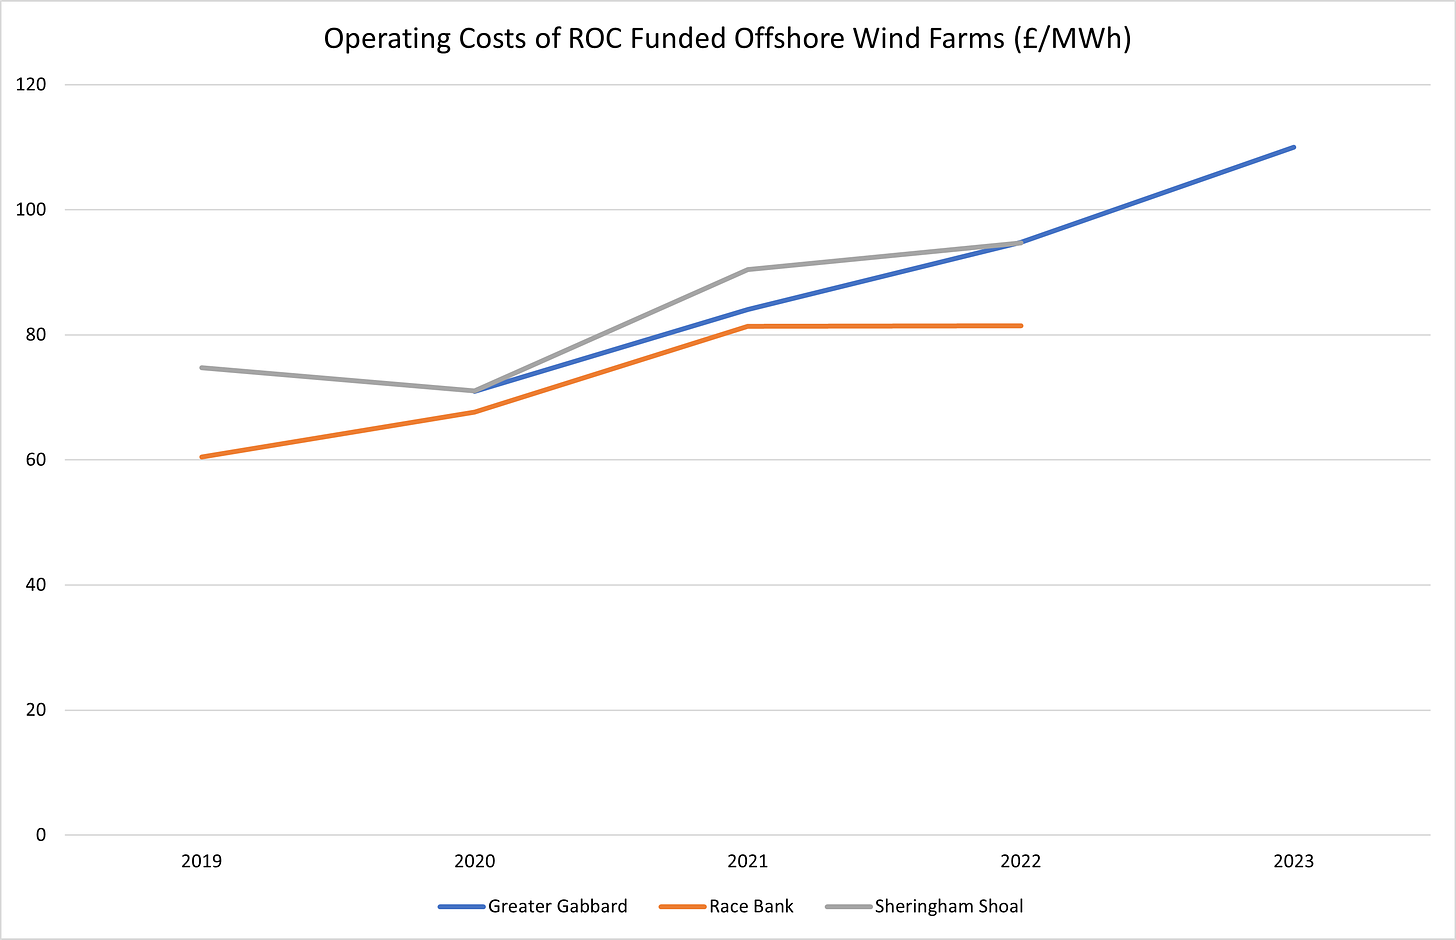 Figure 3 - Operating Costs of ROC Funded Offshore Funded Windfarms (£ per MWh)